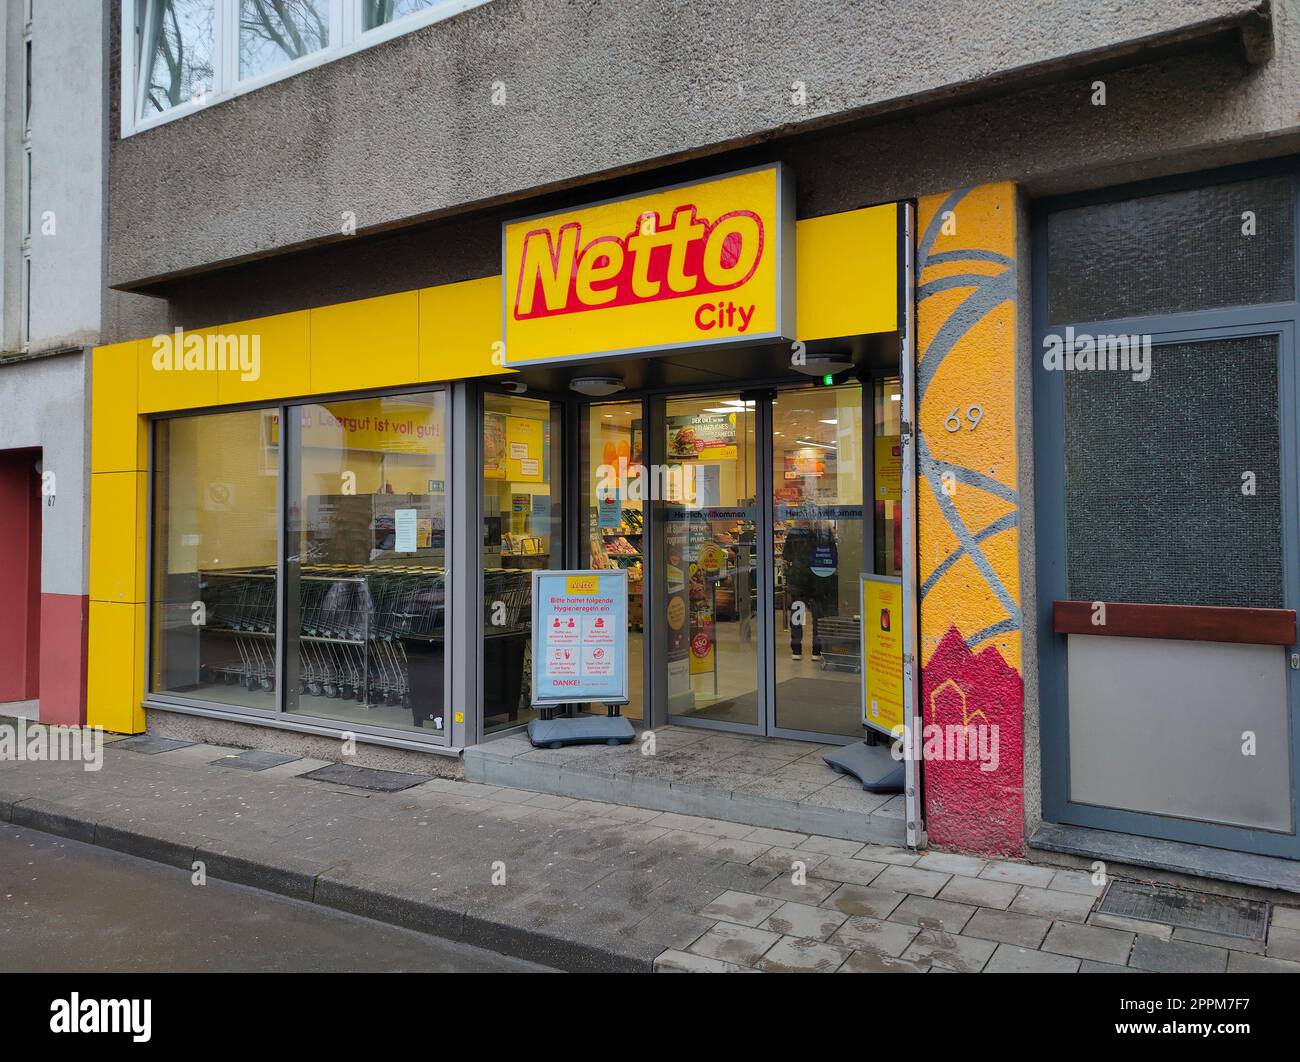 Logo and brand name of Netto store network Stock Photo